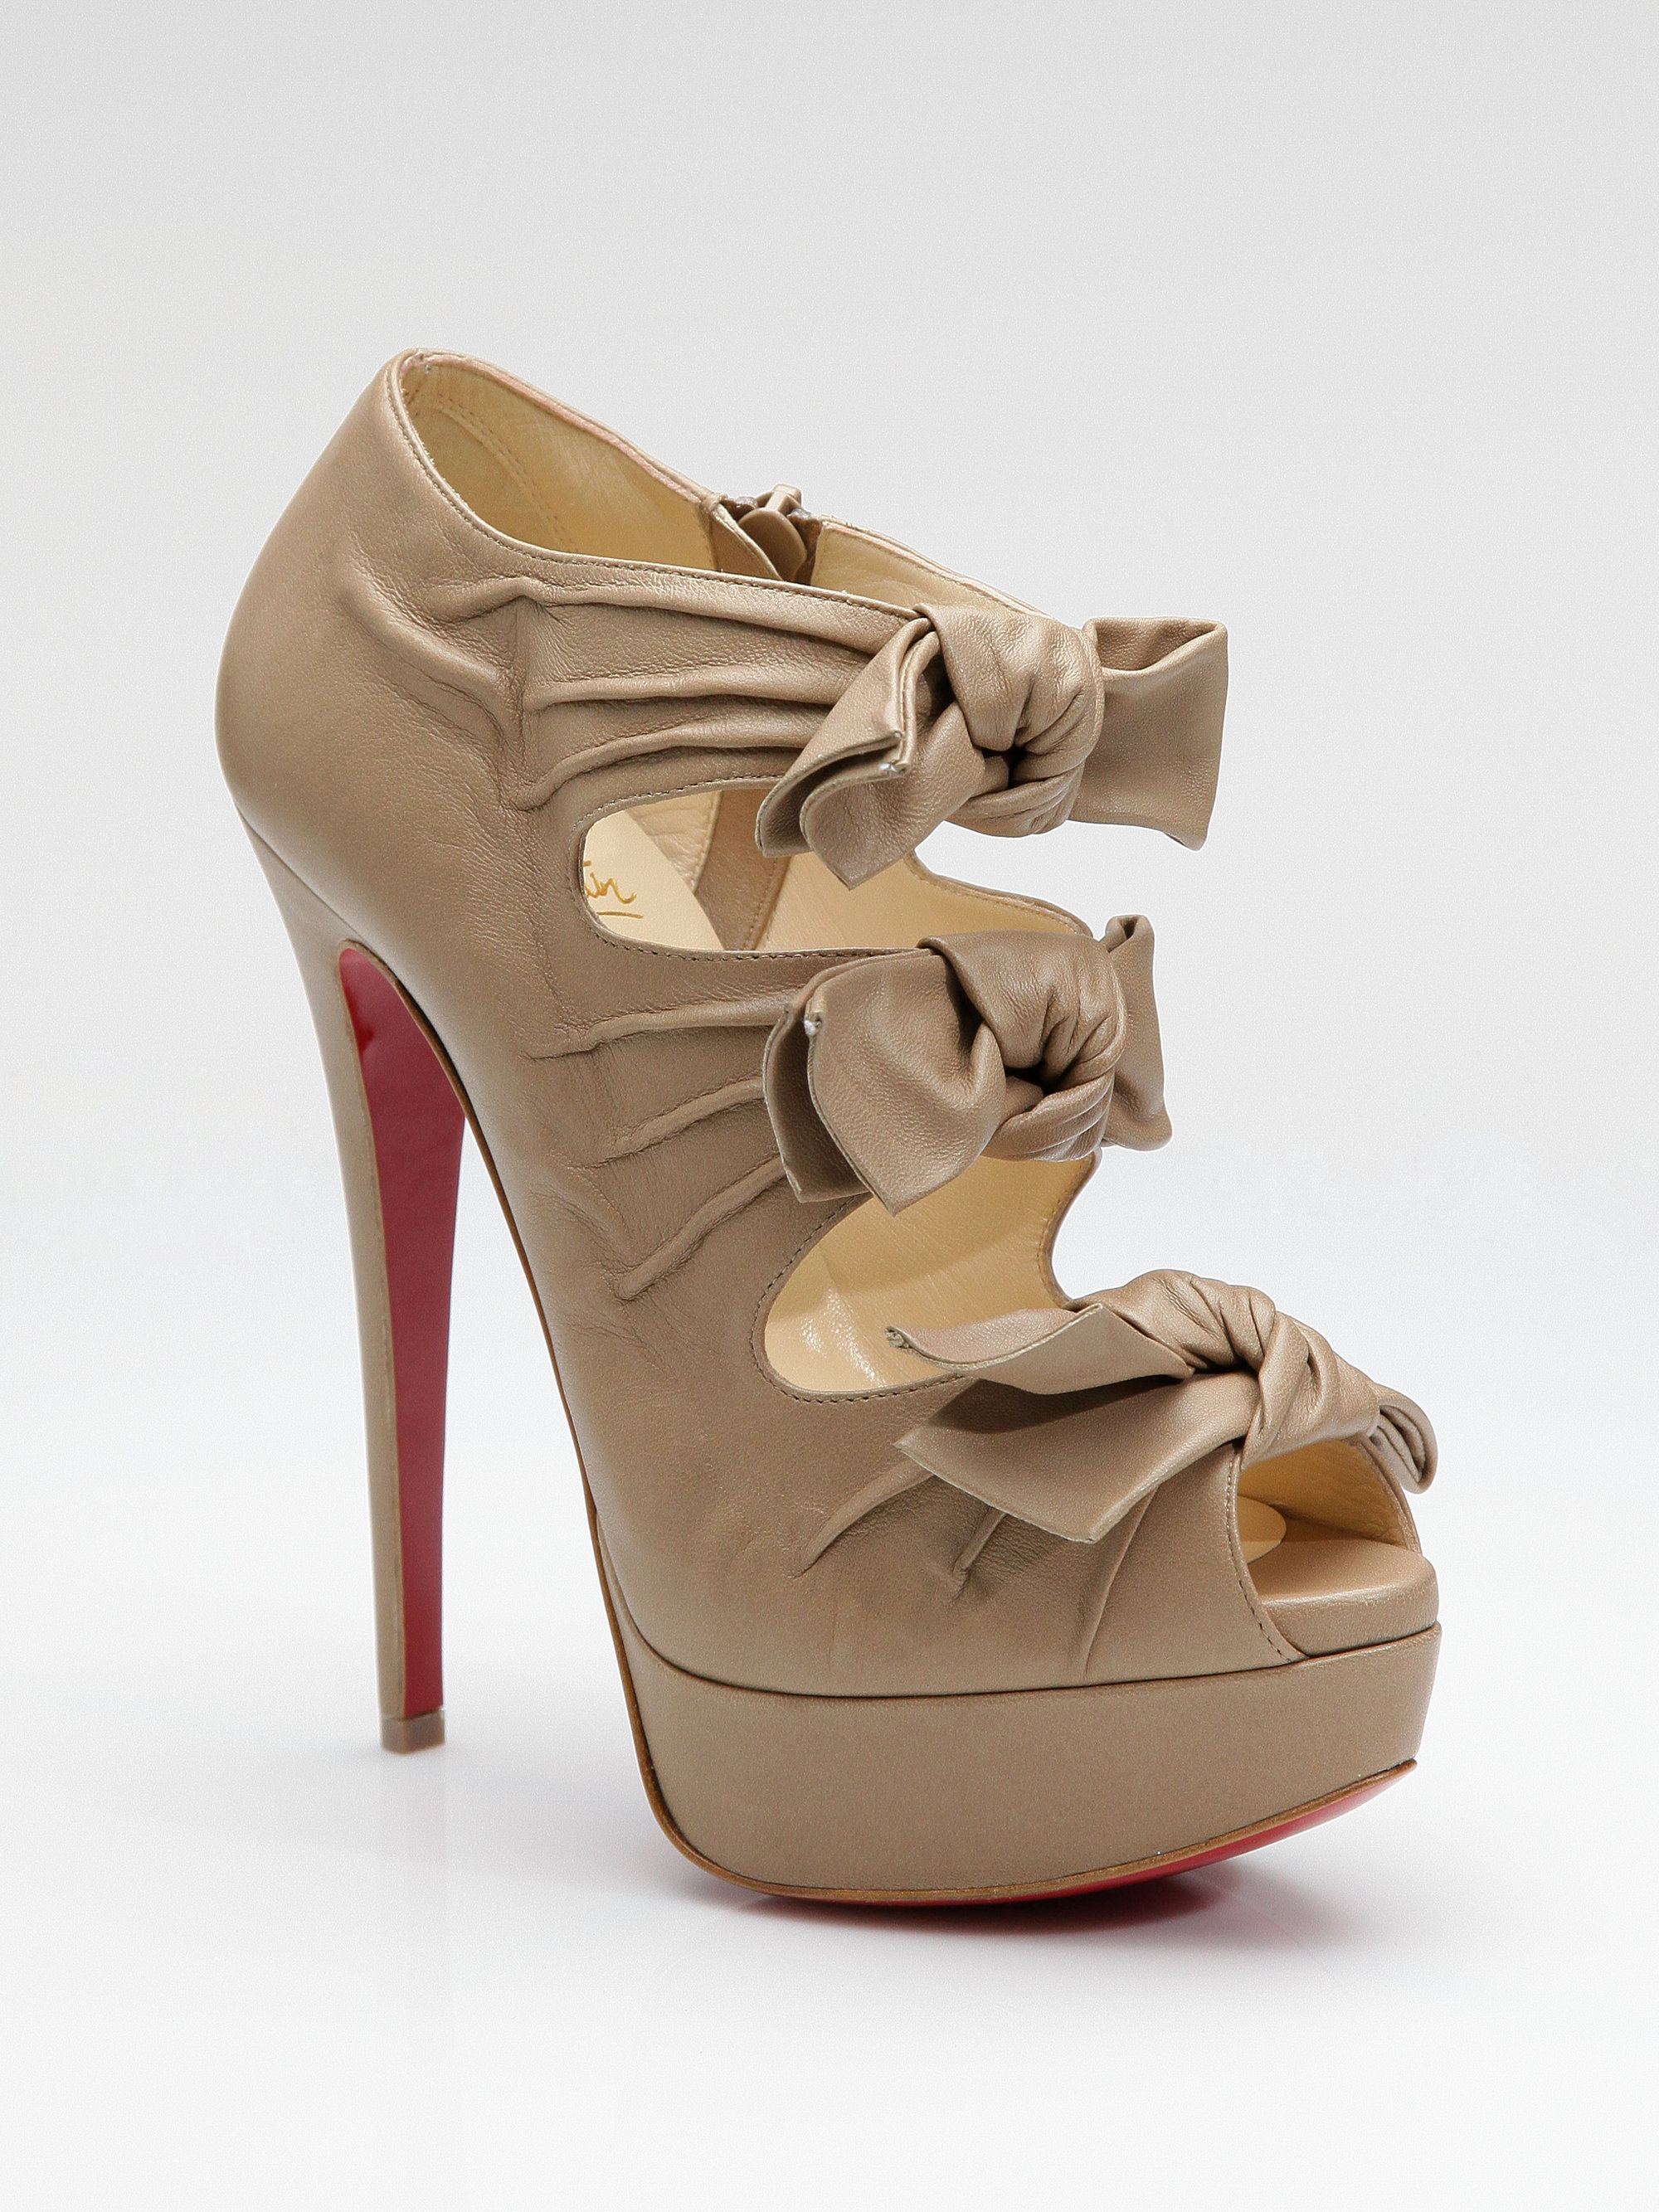 Christian Louboutin Madame Butterfly Platform Pumps in Beige (Natural) -  Lyst